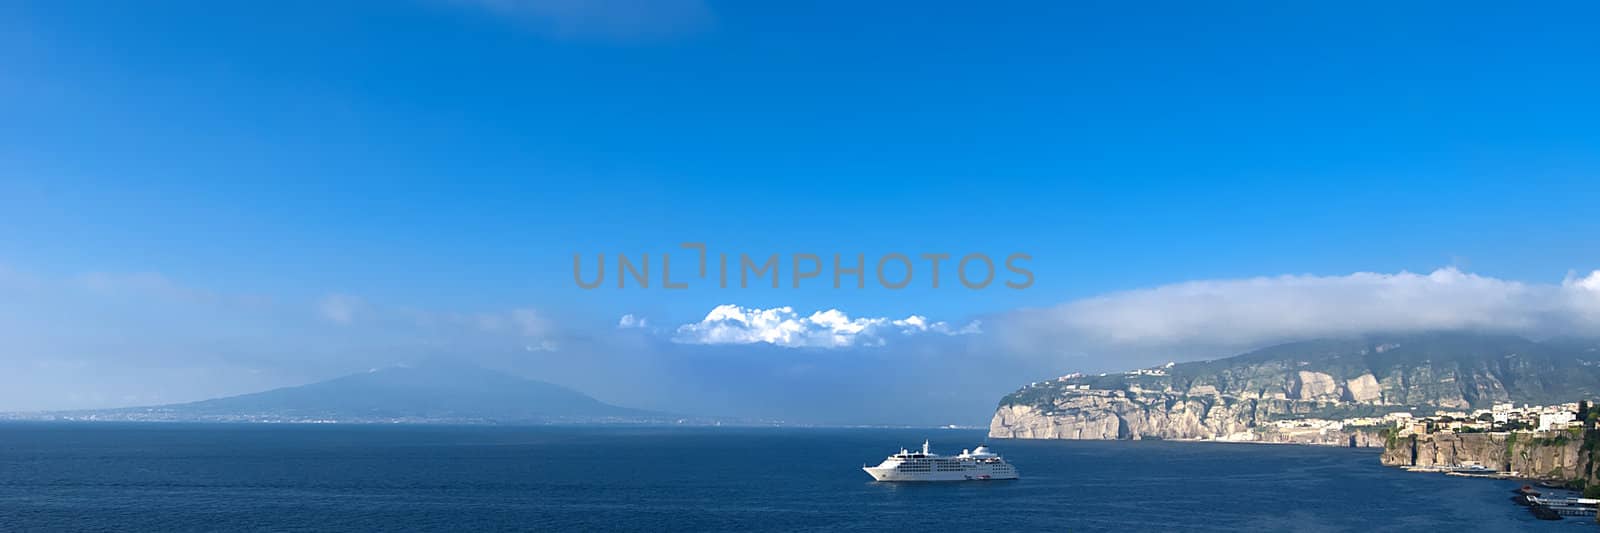 Panoramic across Bay of Naples to Versuvius with cruise ship by itsrich